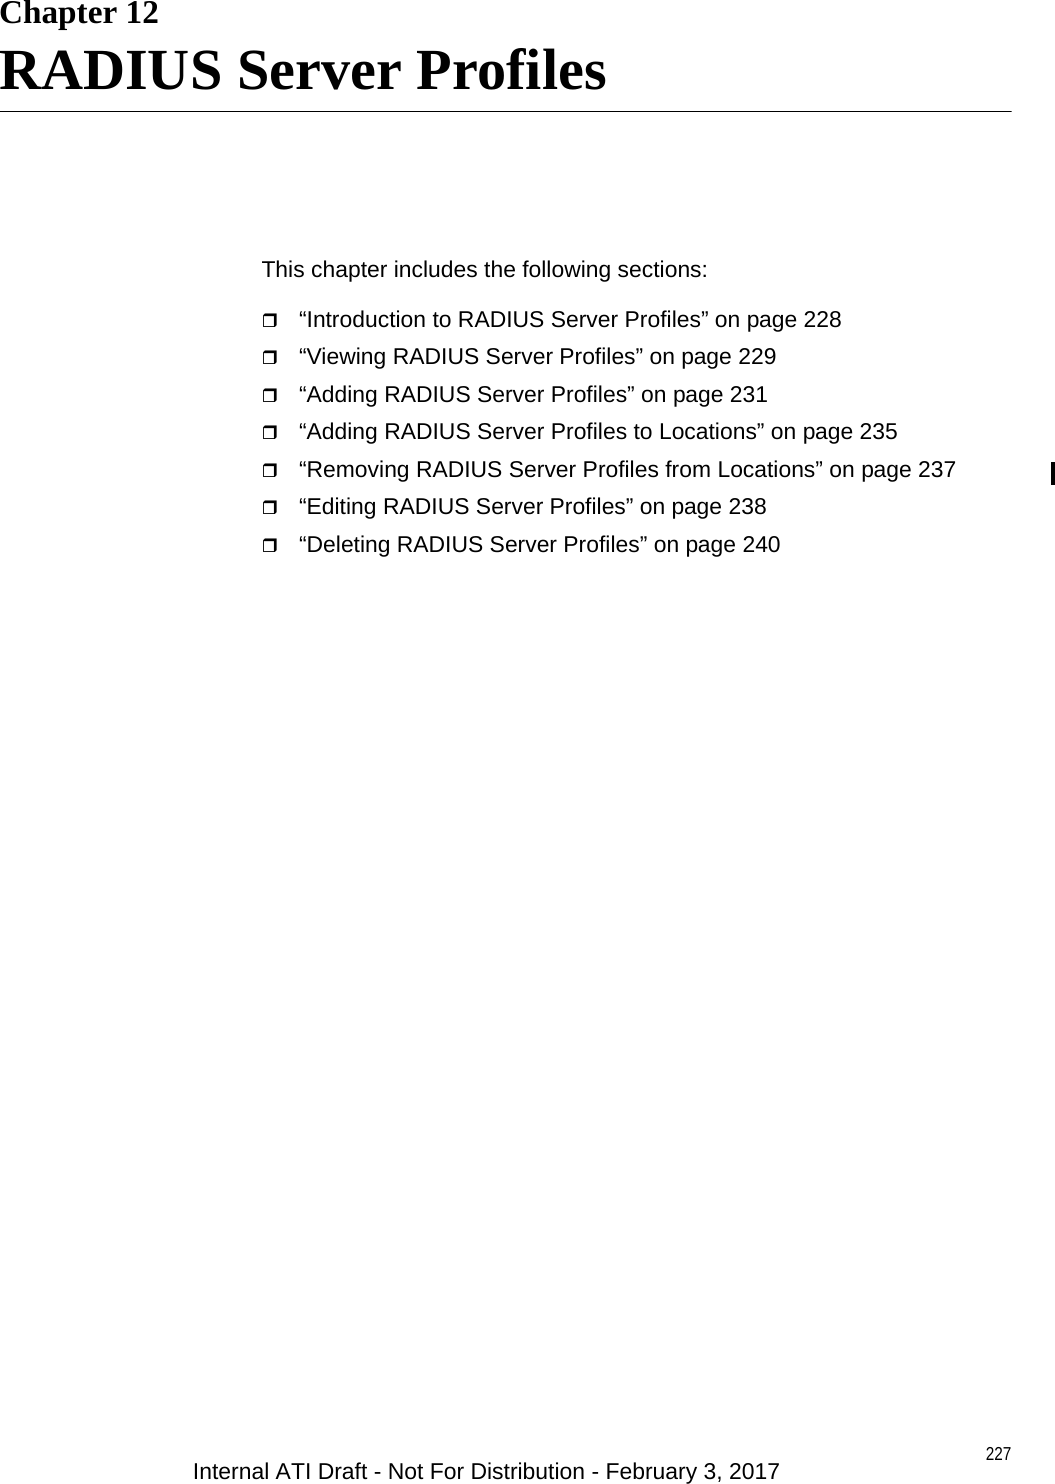 227Chapter 12RADIUS Server ProfilesThis chapter includes the following sections:“Introduction to RADIUS Server Profiles” on page 228“Viewing RADIUS Server Profiles” on page 229“Adding RADIUS Server Profiles” on page 231“Adding RADIUS Server Profiles to Locations” on page 235“Removing RADIUS Server Profiles from Locations” on page 237“Editing RADIUS Server Profiles” on page 238“Deleting RADIUS Server Profiles” on page 240Internal ATI Draft - Not For Distribution - February 3, 2017